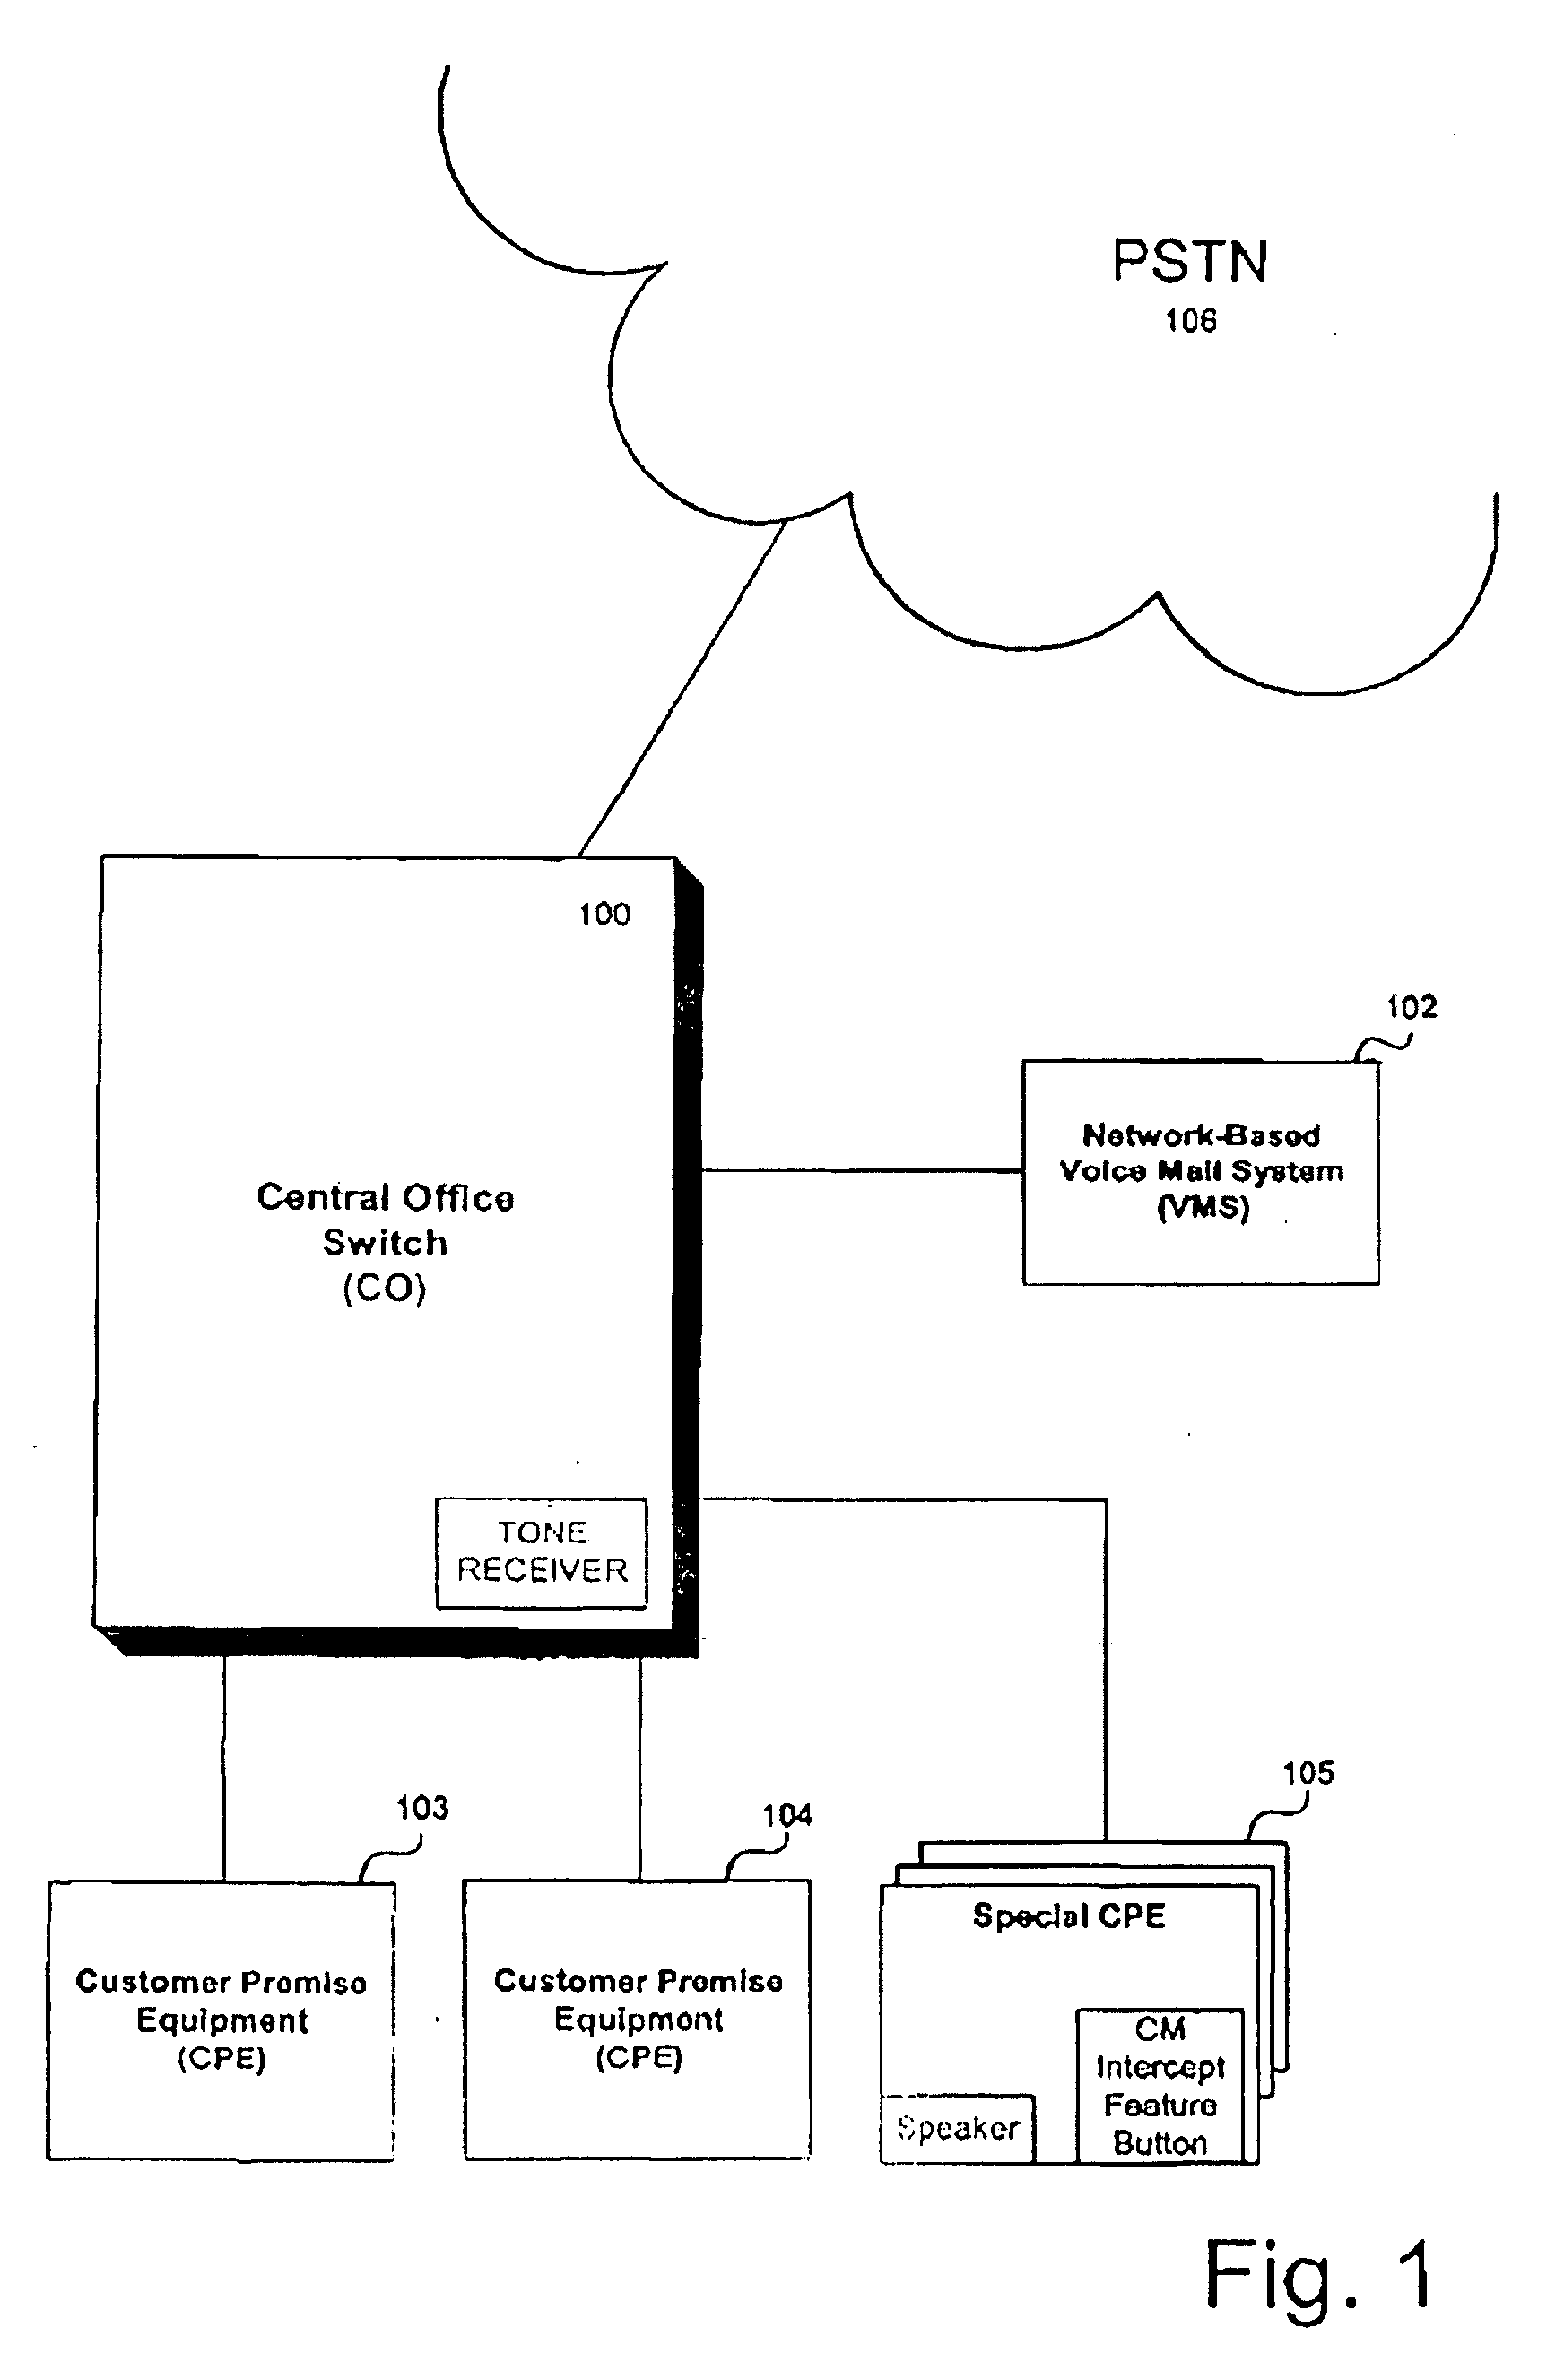 Apparatus, System and Method for Monitoring a Call Forwarded to a Network-Based Voice Mail System